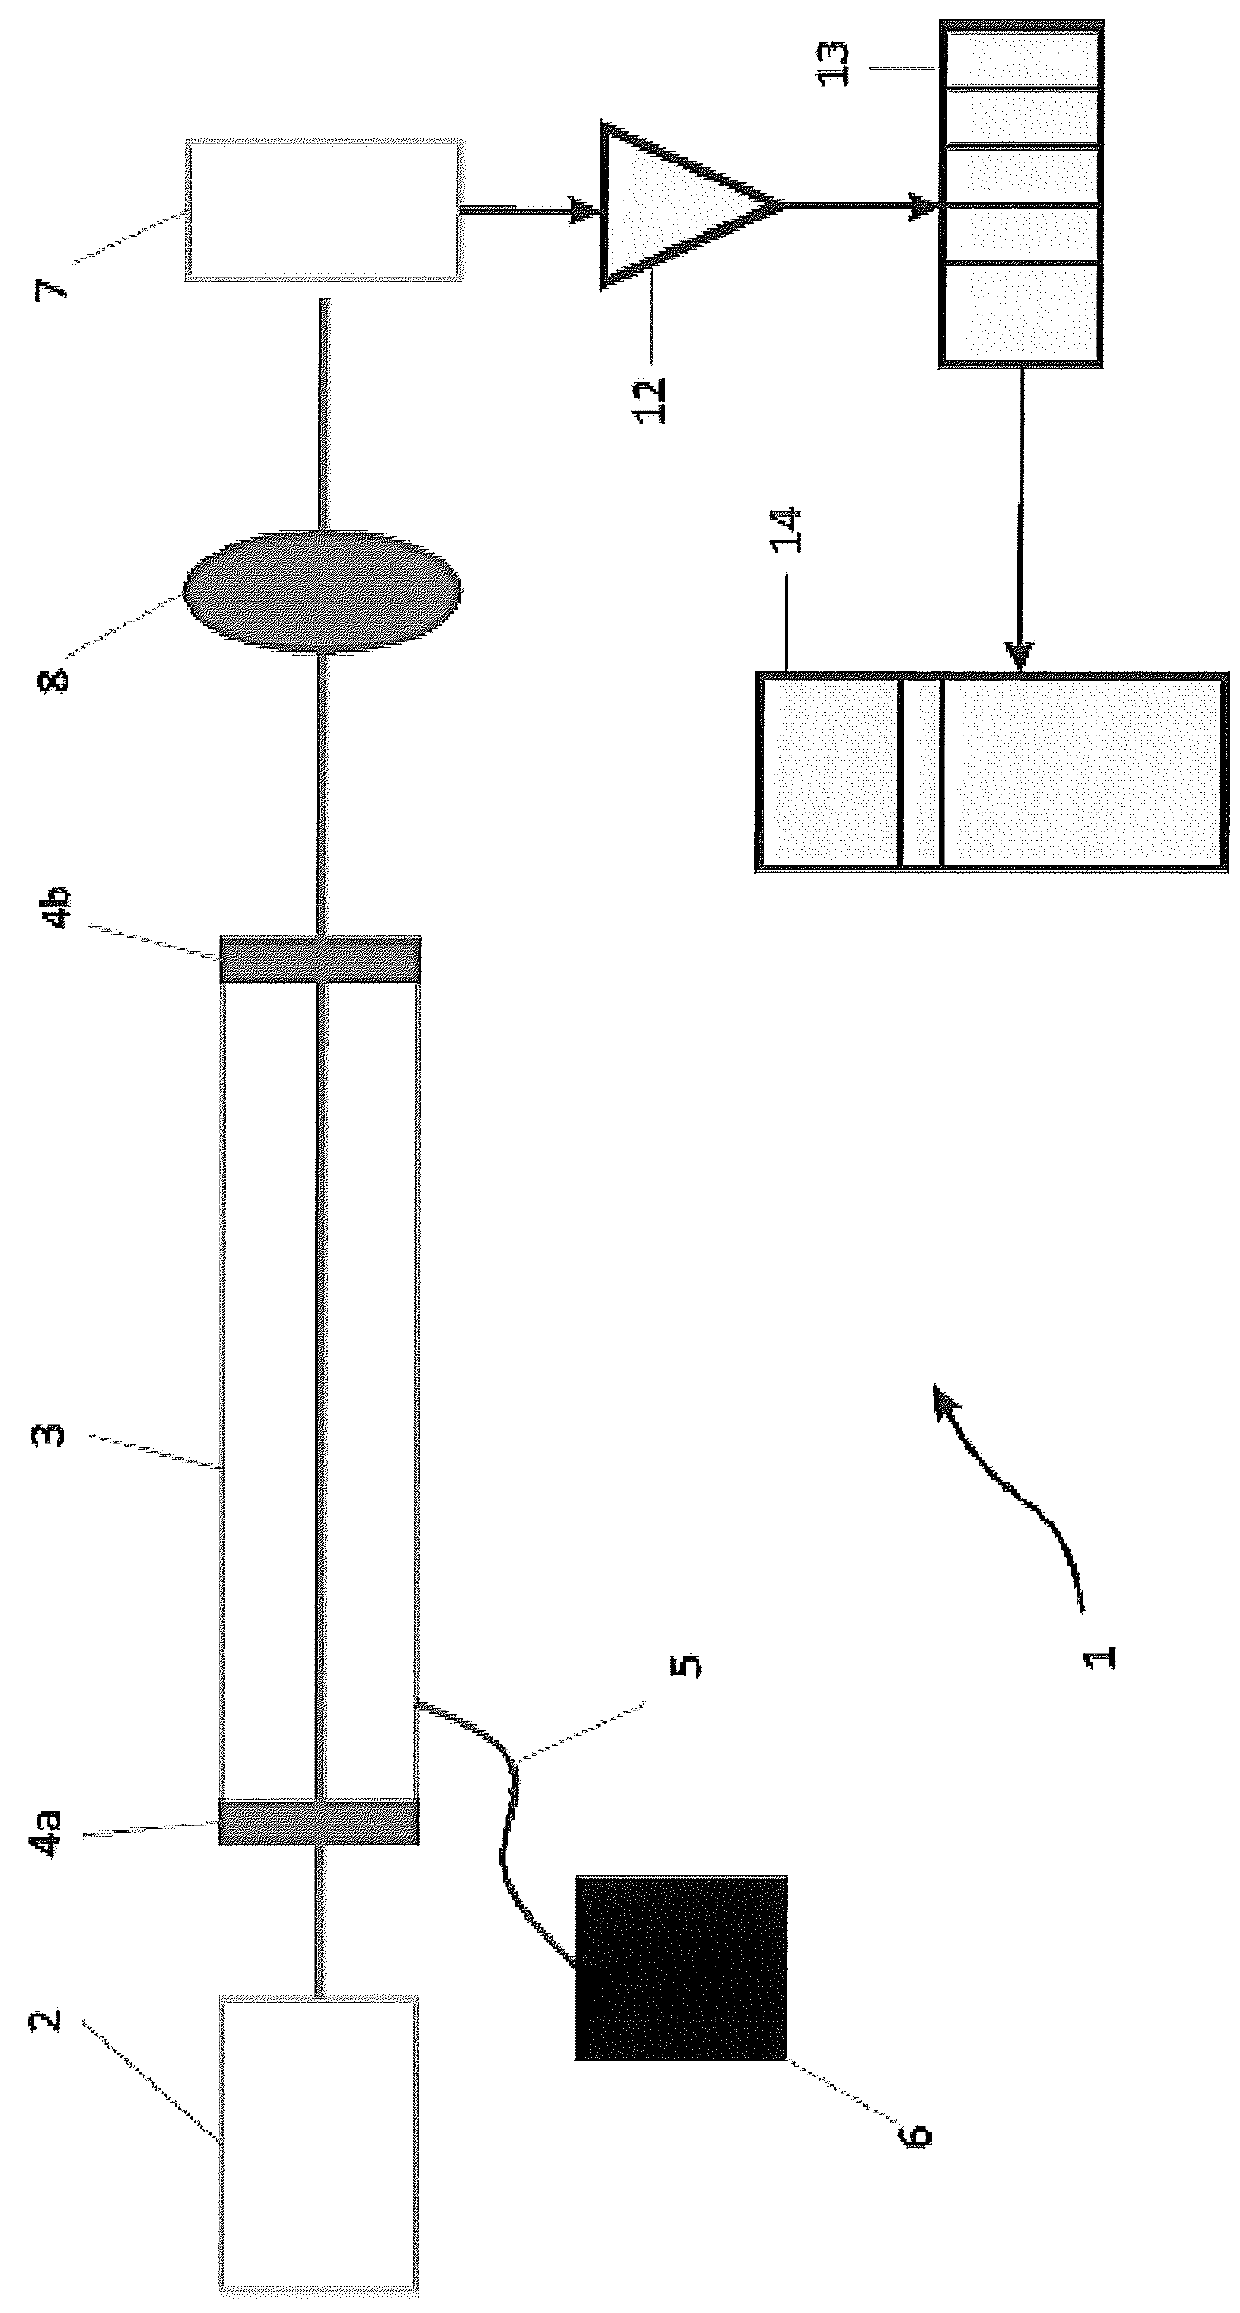 Apparatus and method for measuring the concentration of trace gases by scar spectroscopy